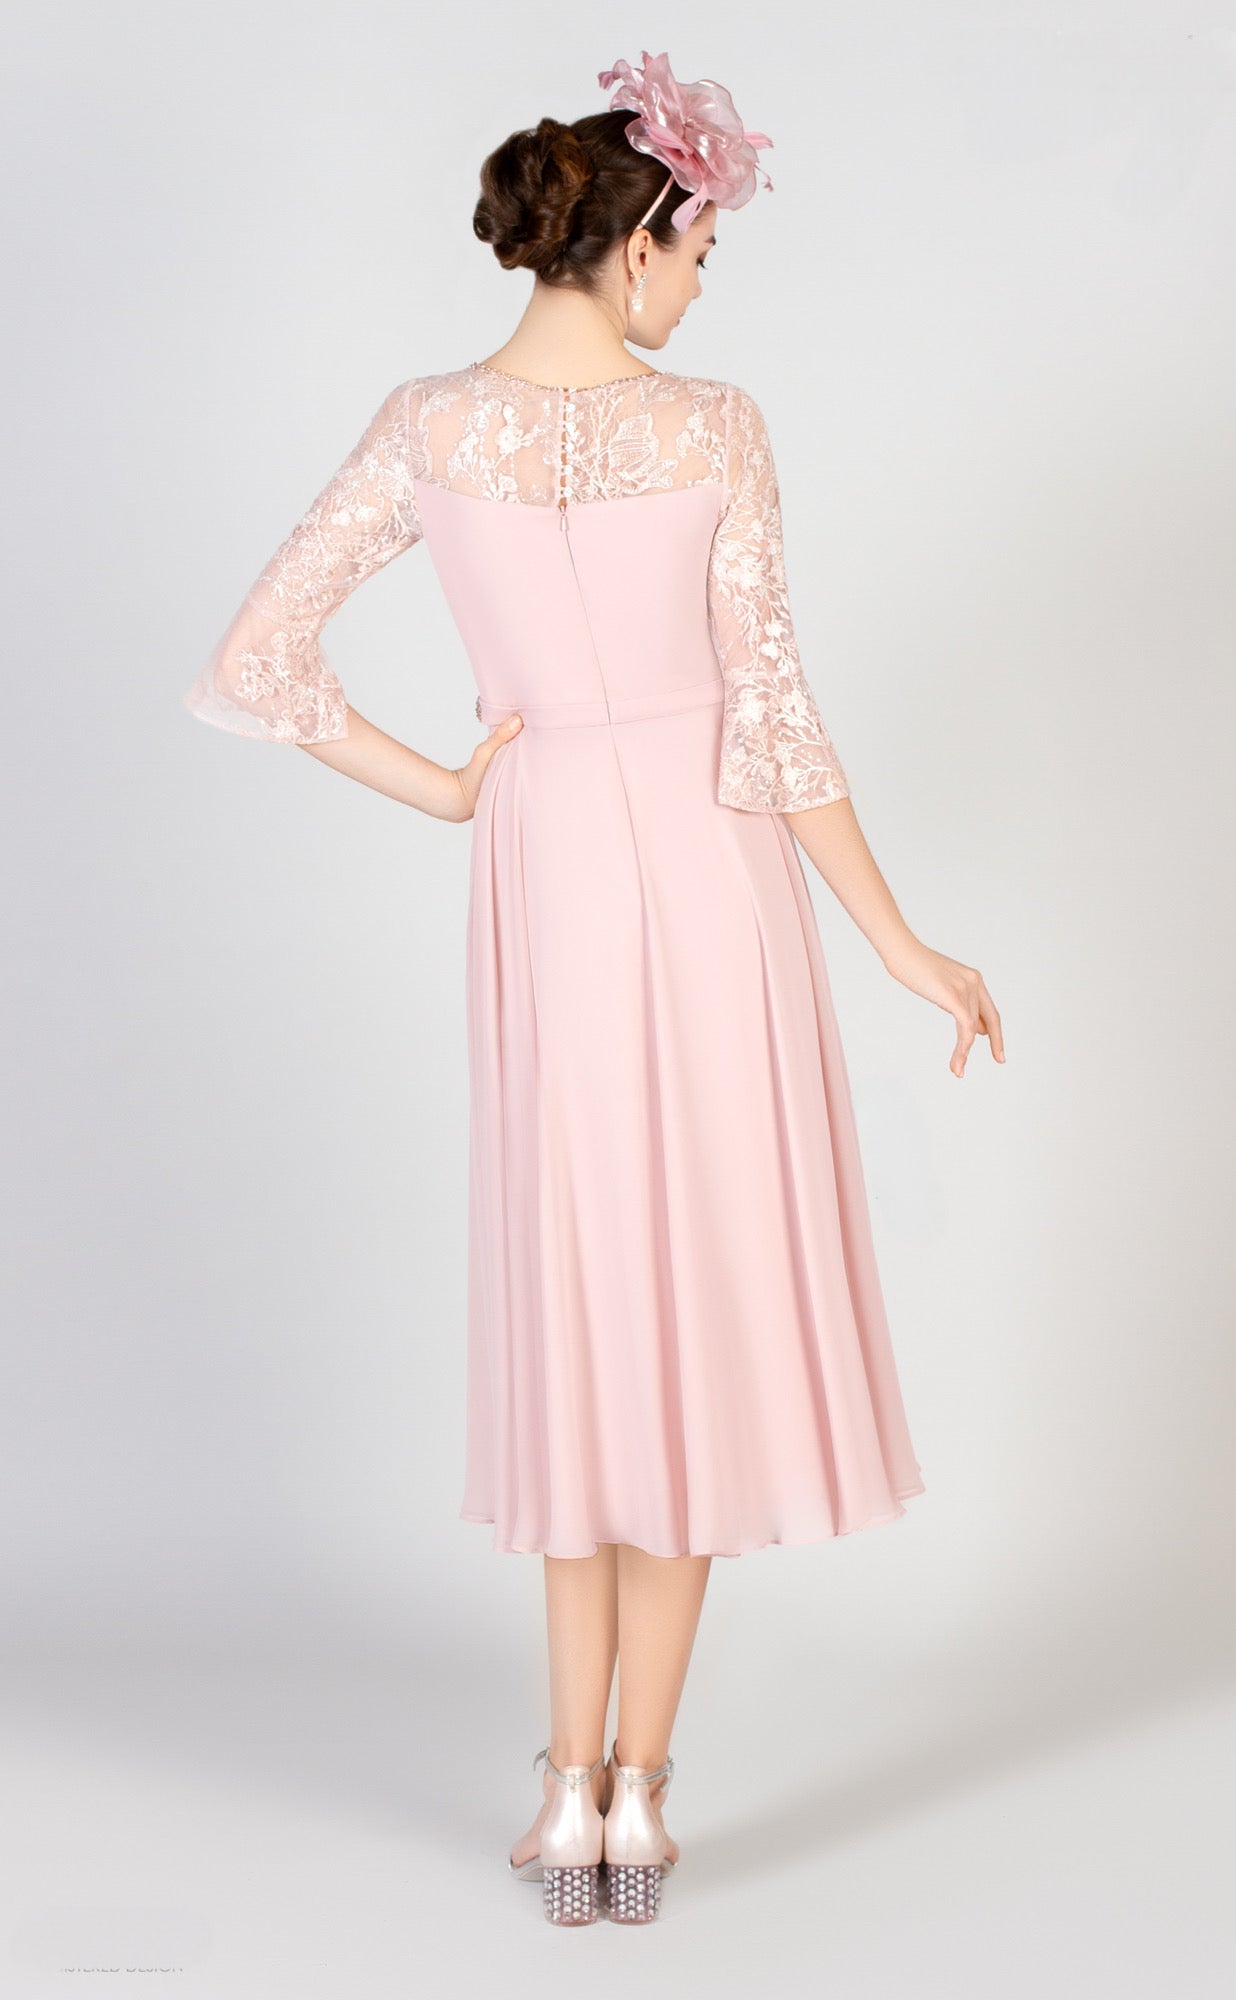 Dusty Rose Dress with Lace Detail and Diamante Belt